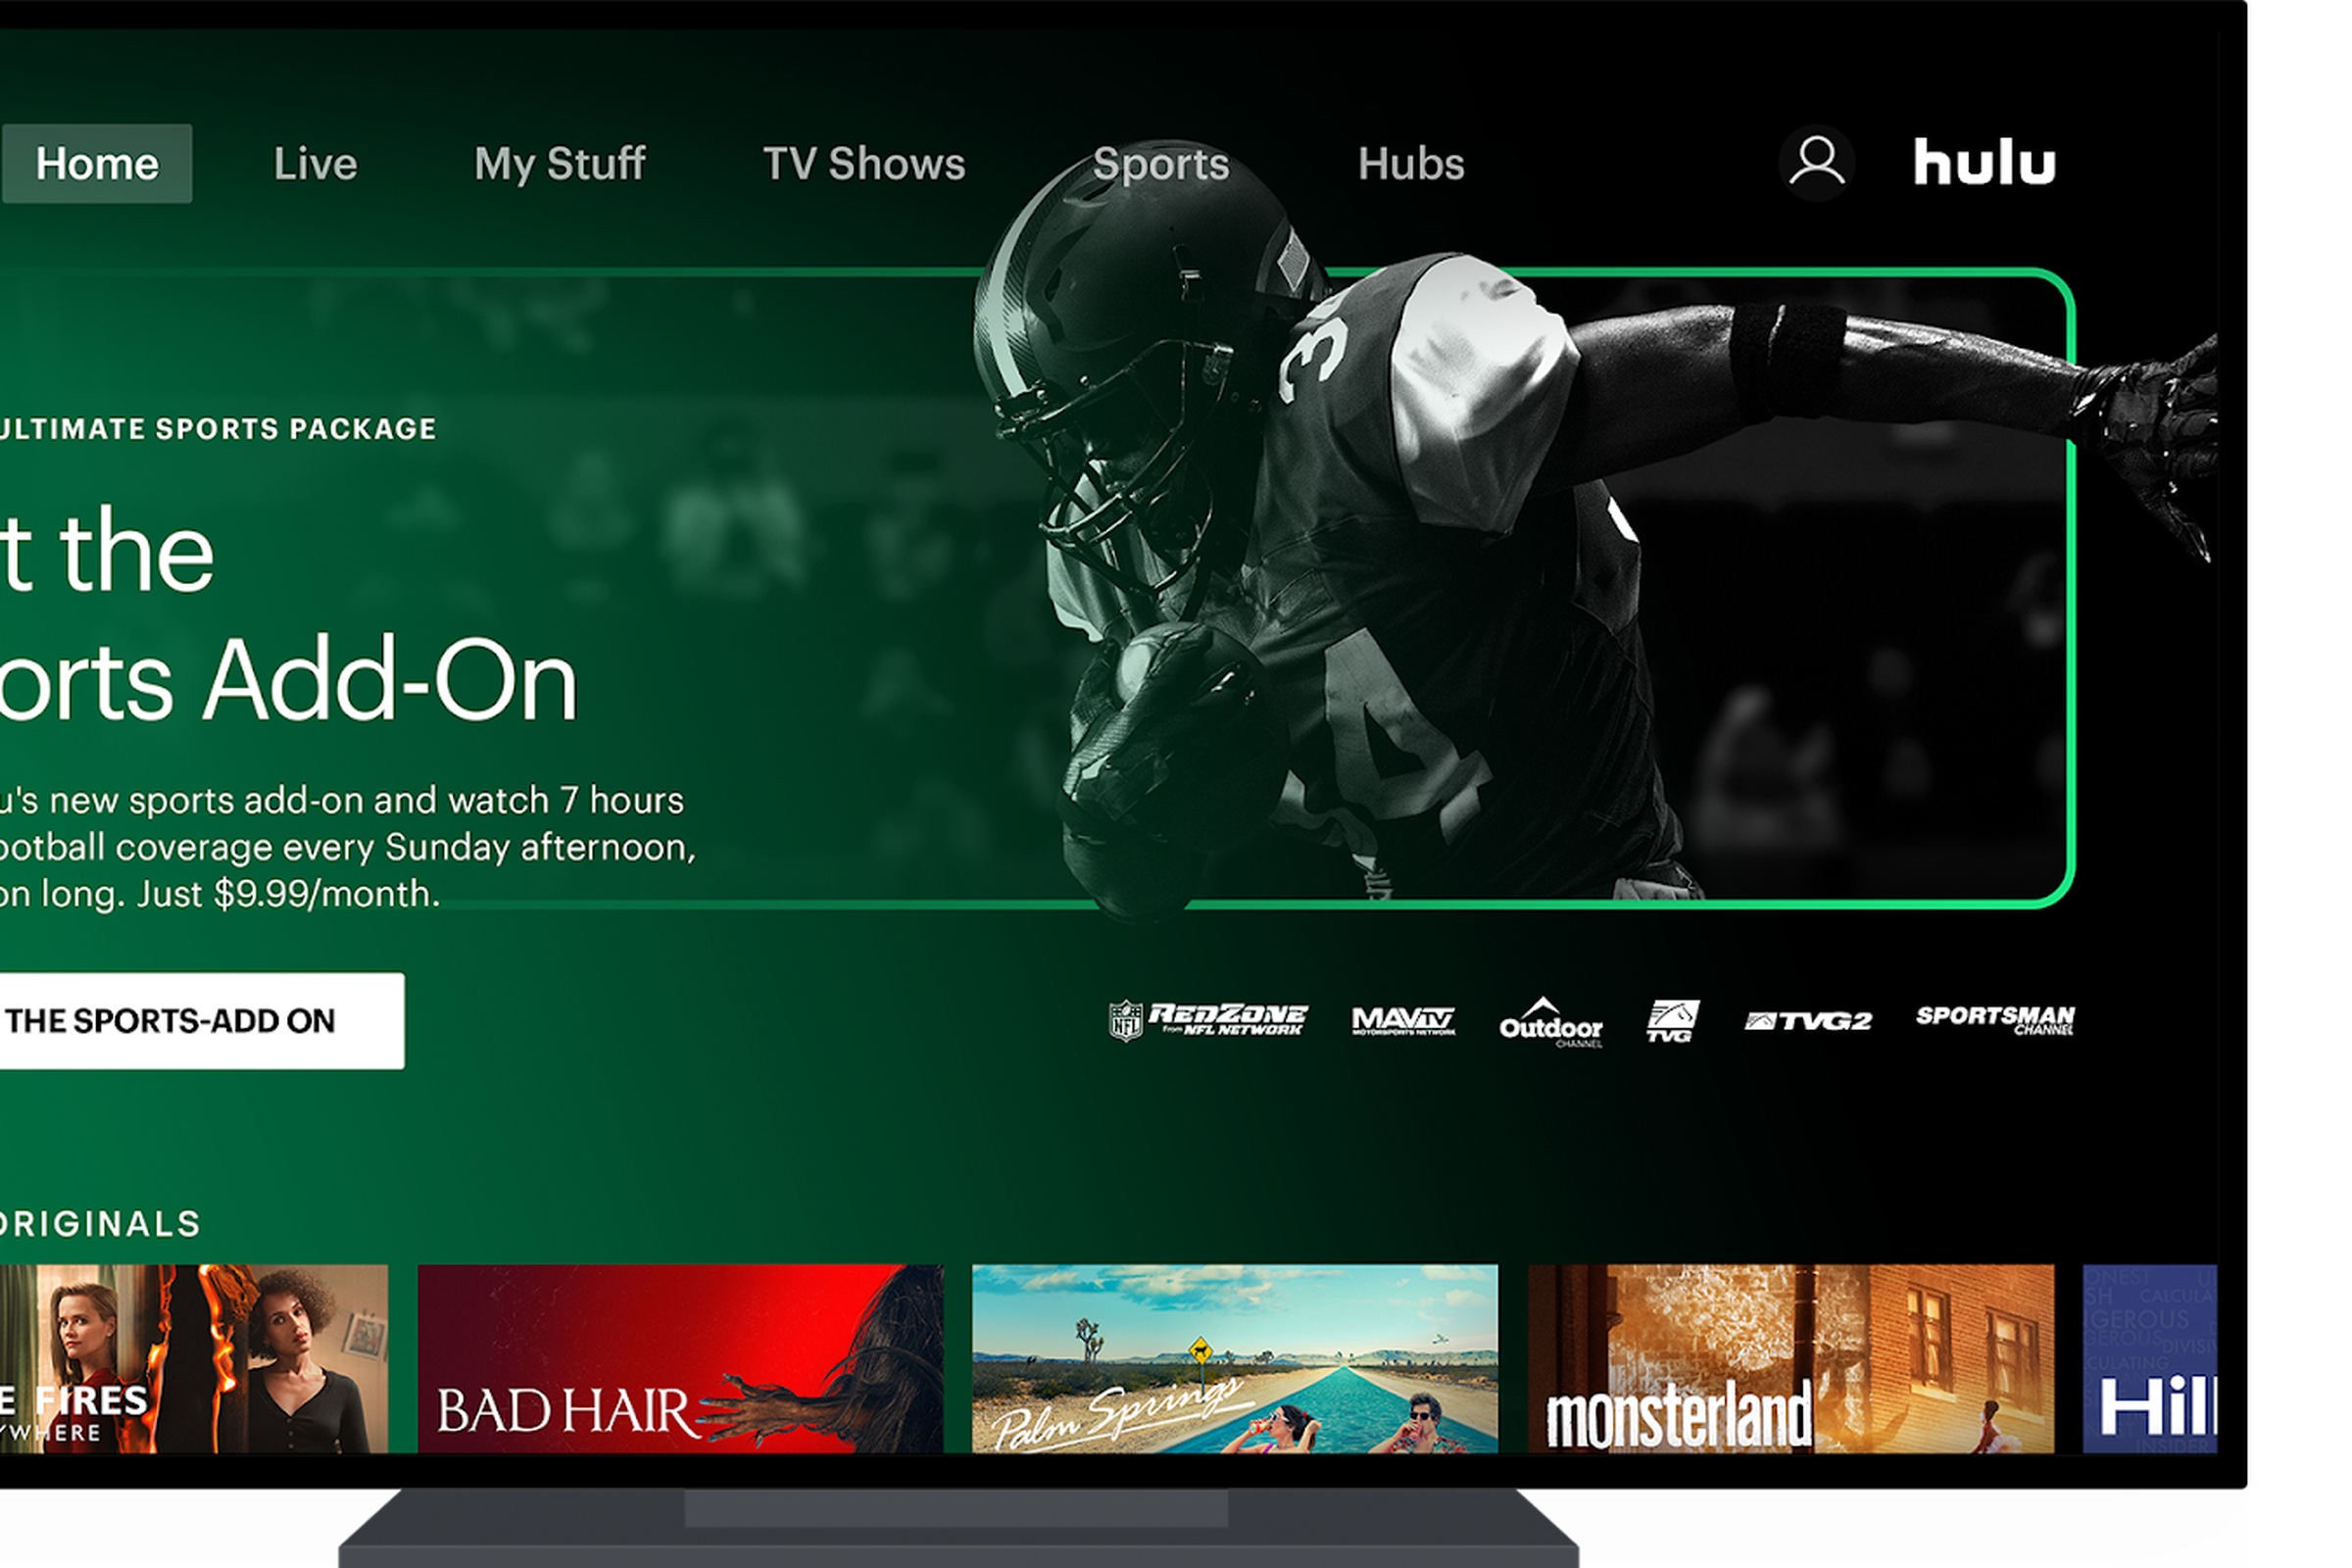 Hulu with Live TV’s Sports Add-On displaying on a TV.